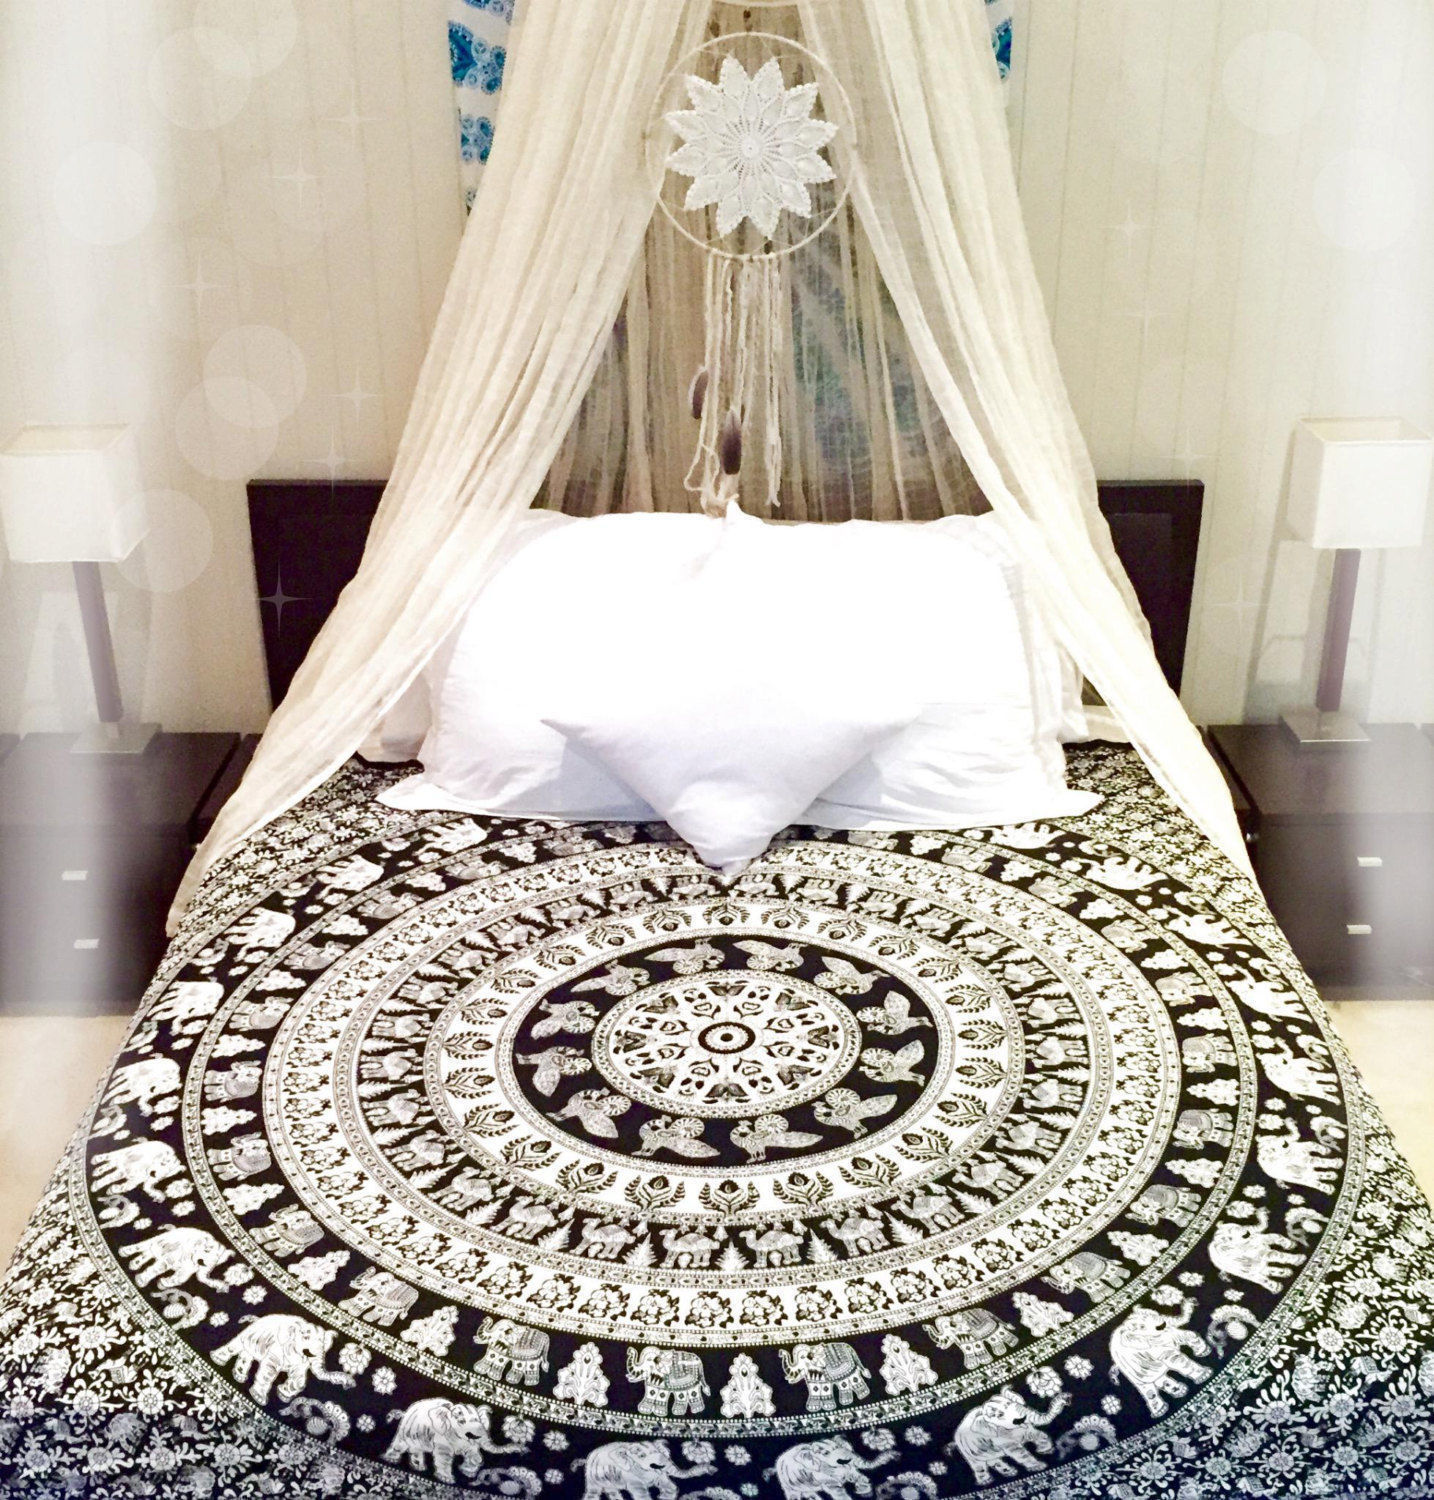 RAJRANG BRINGING RAJASTHAN TO YOU Black and White Mandala Large Elephant Tapestries Decorative Boho Hippie Wall Hanging Indian Queen Size Bedspread Sheet Pure Cotton Bedding 228 x 213 cms